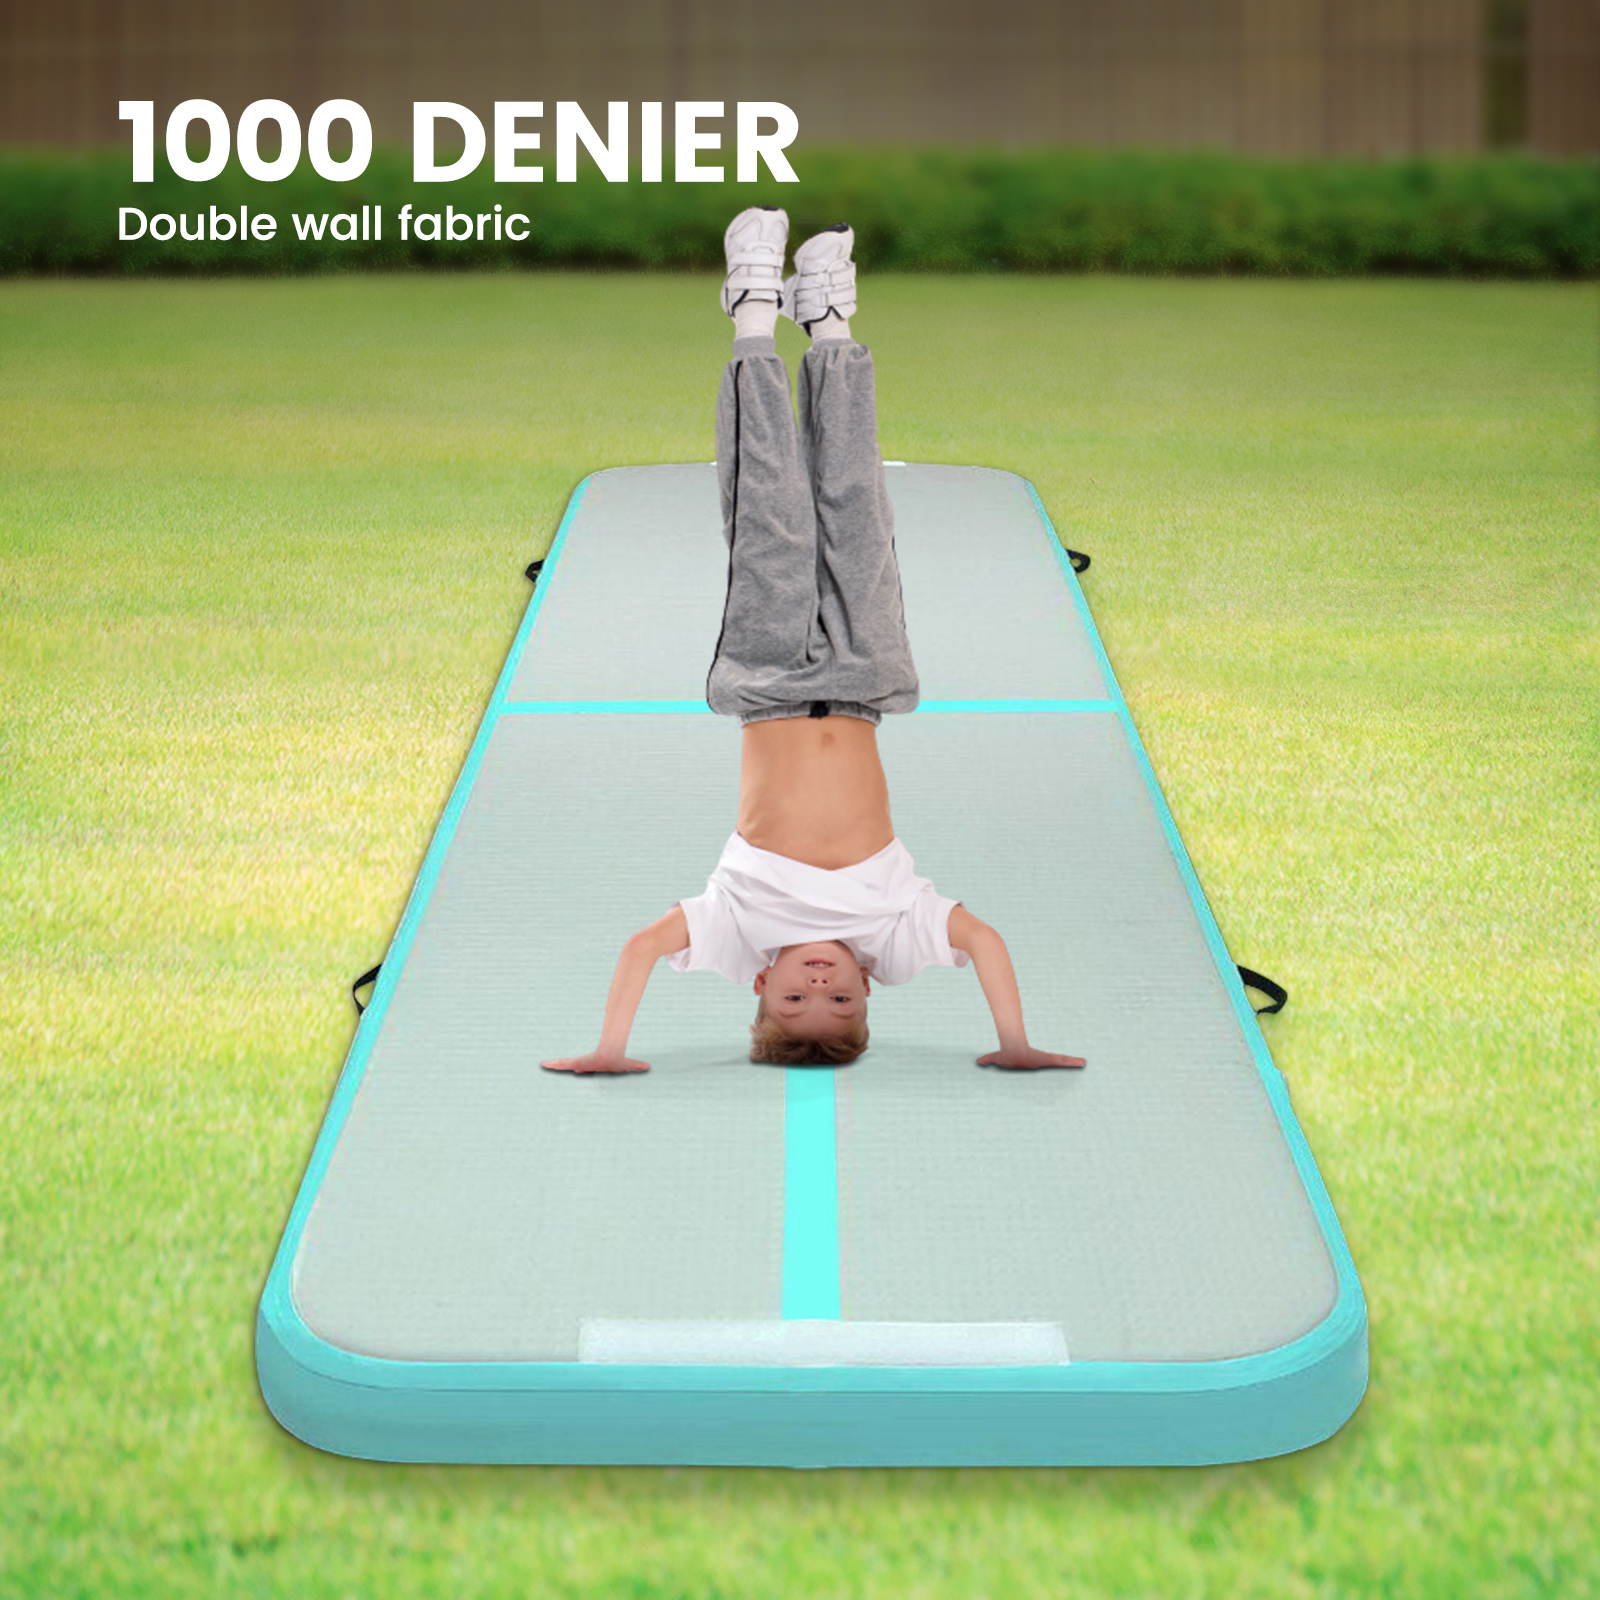 Inflatable Air Track Mat 3X1M with Pump Tumbling Gymnastics Green 10CM Thick